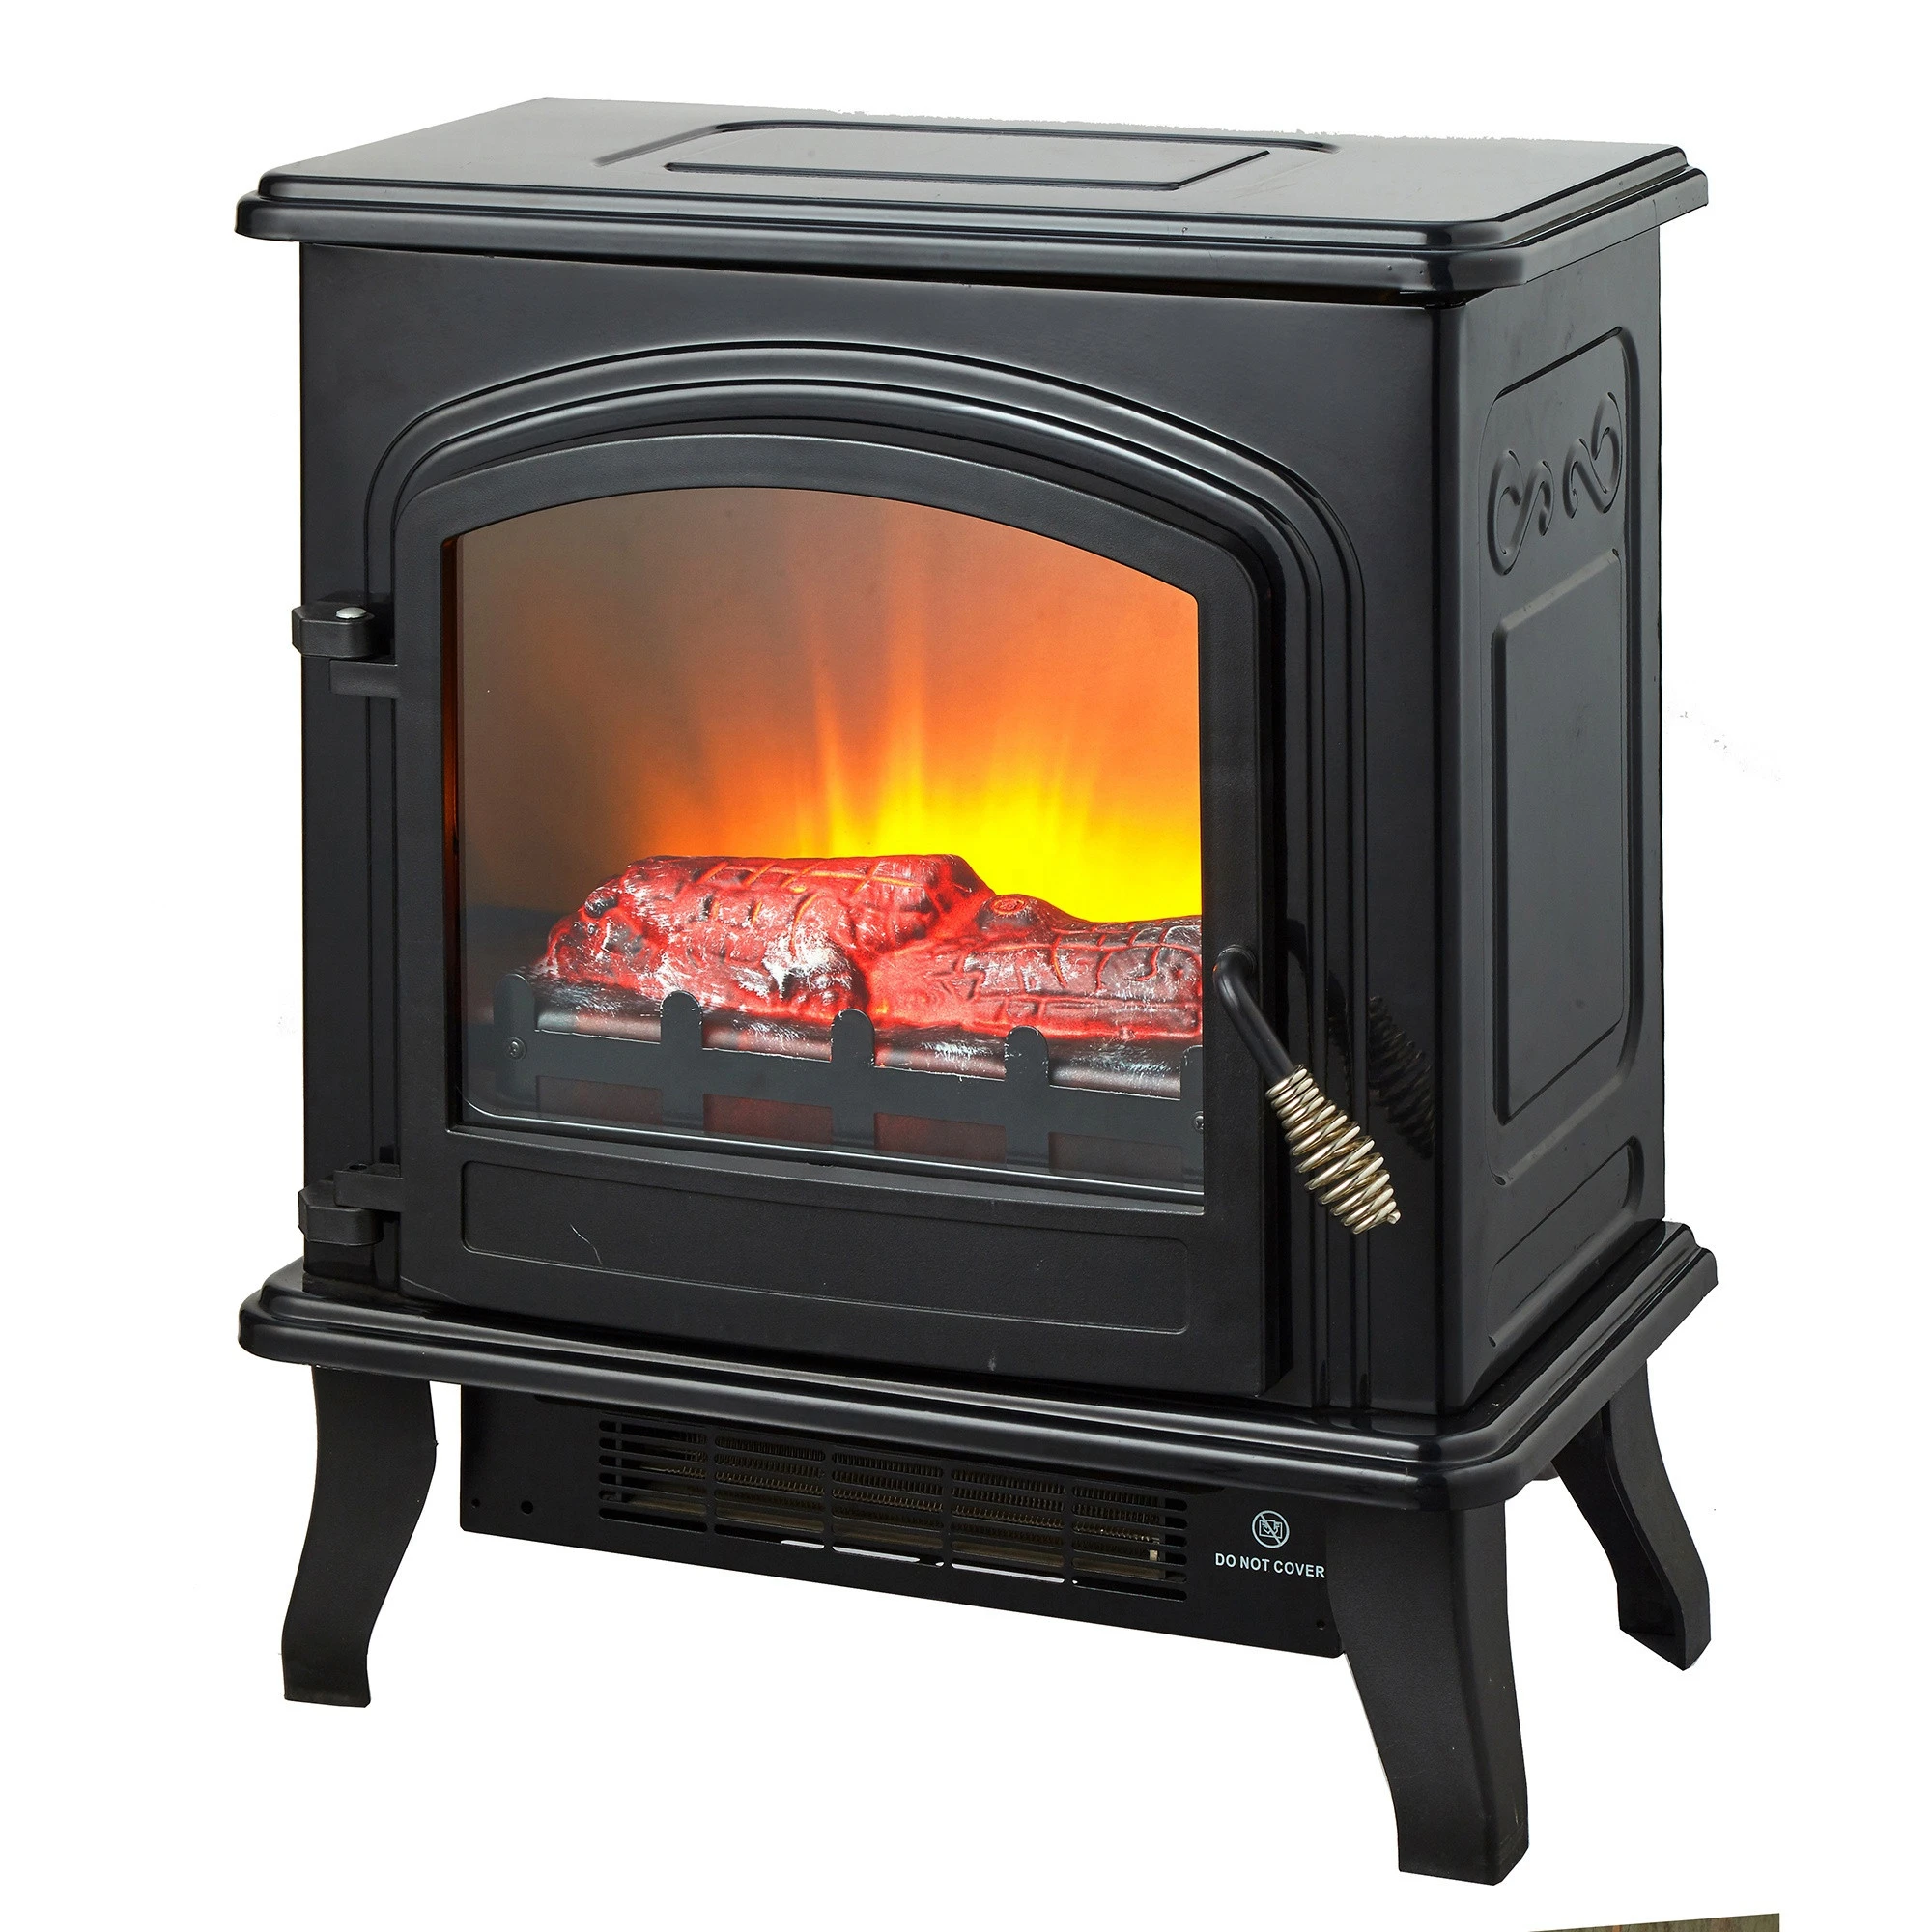 SF-1618 Real Log flame effect luxury electric cast iron fireplace stove